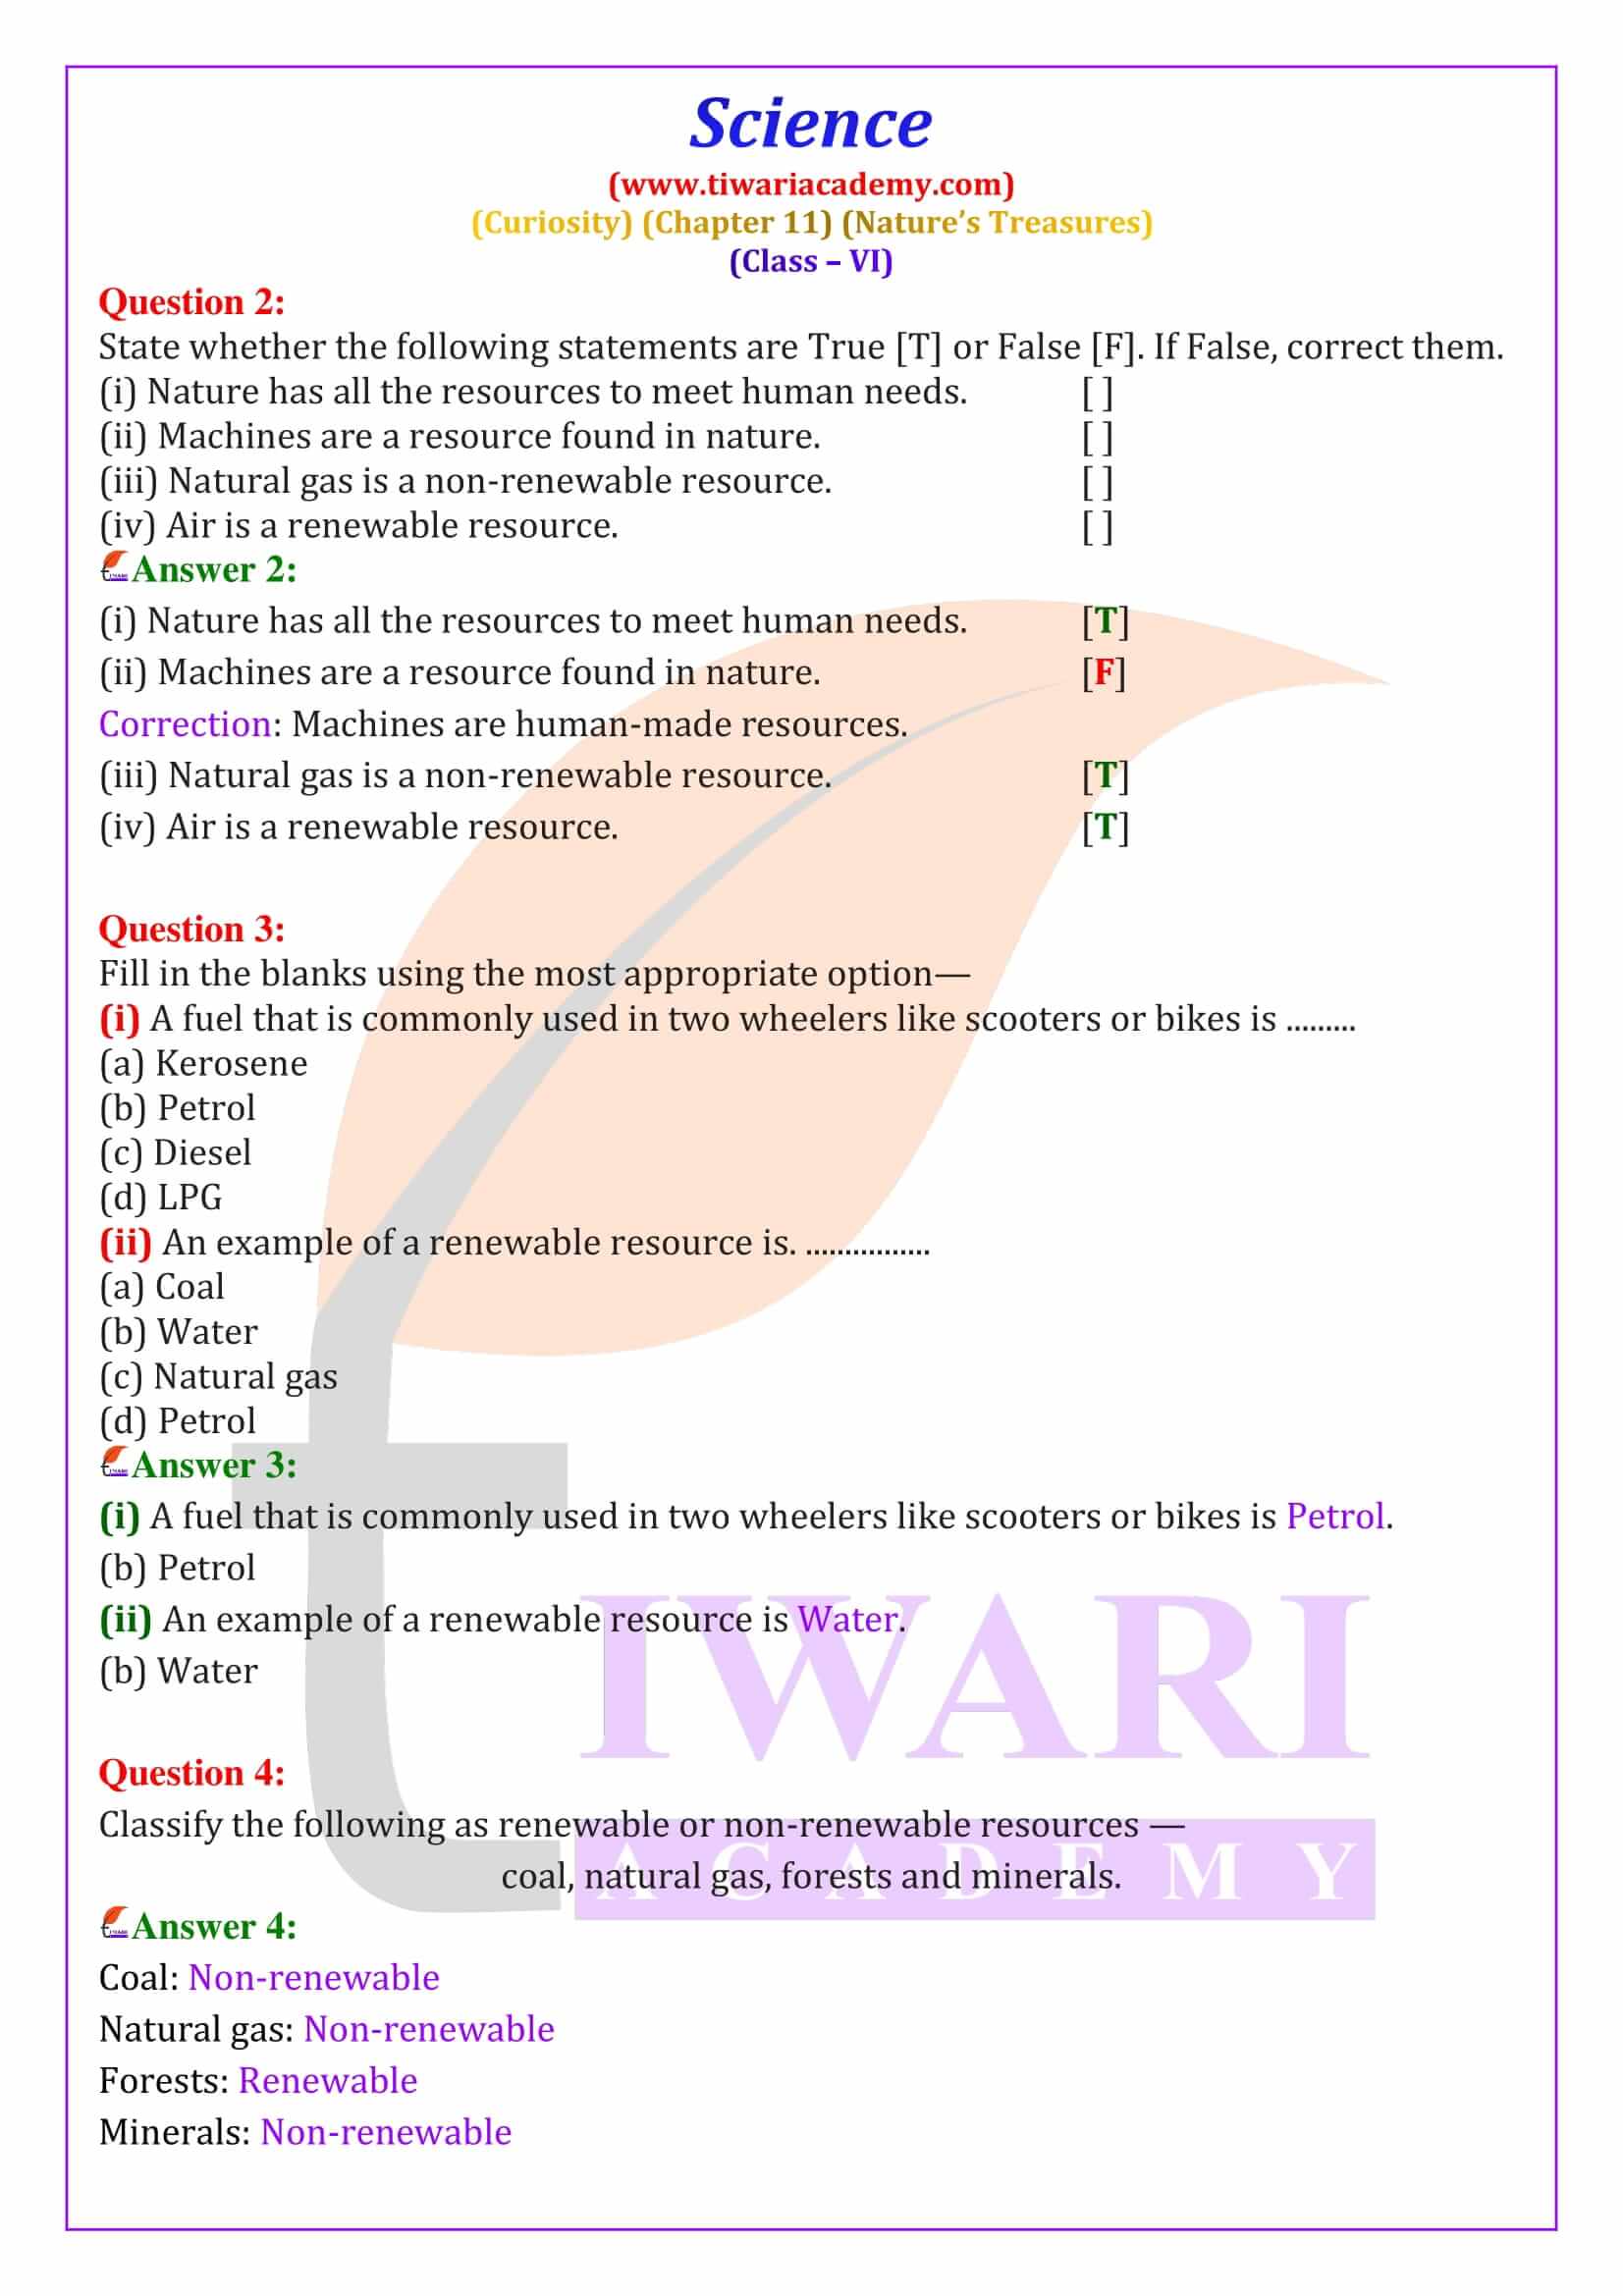 Class 6 Science Curiosity Chapter 11 NCERT Solutions